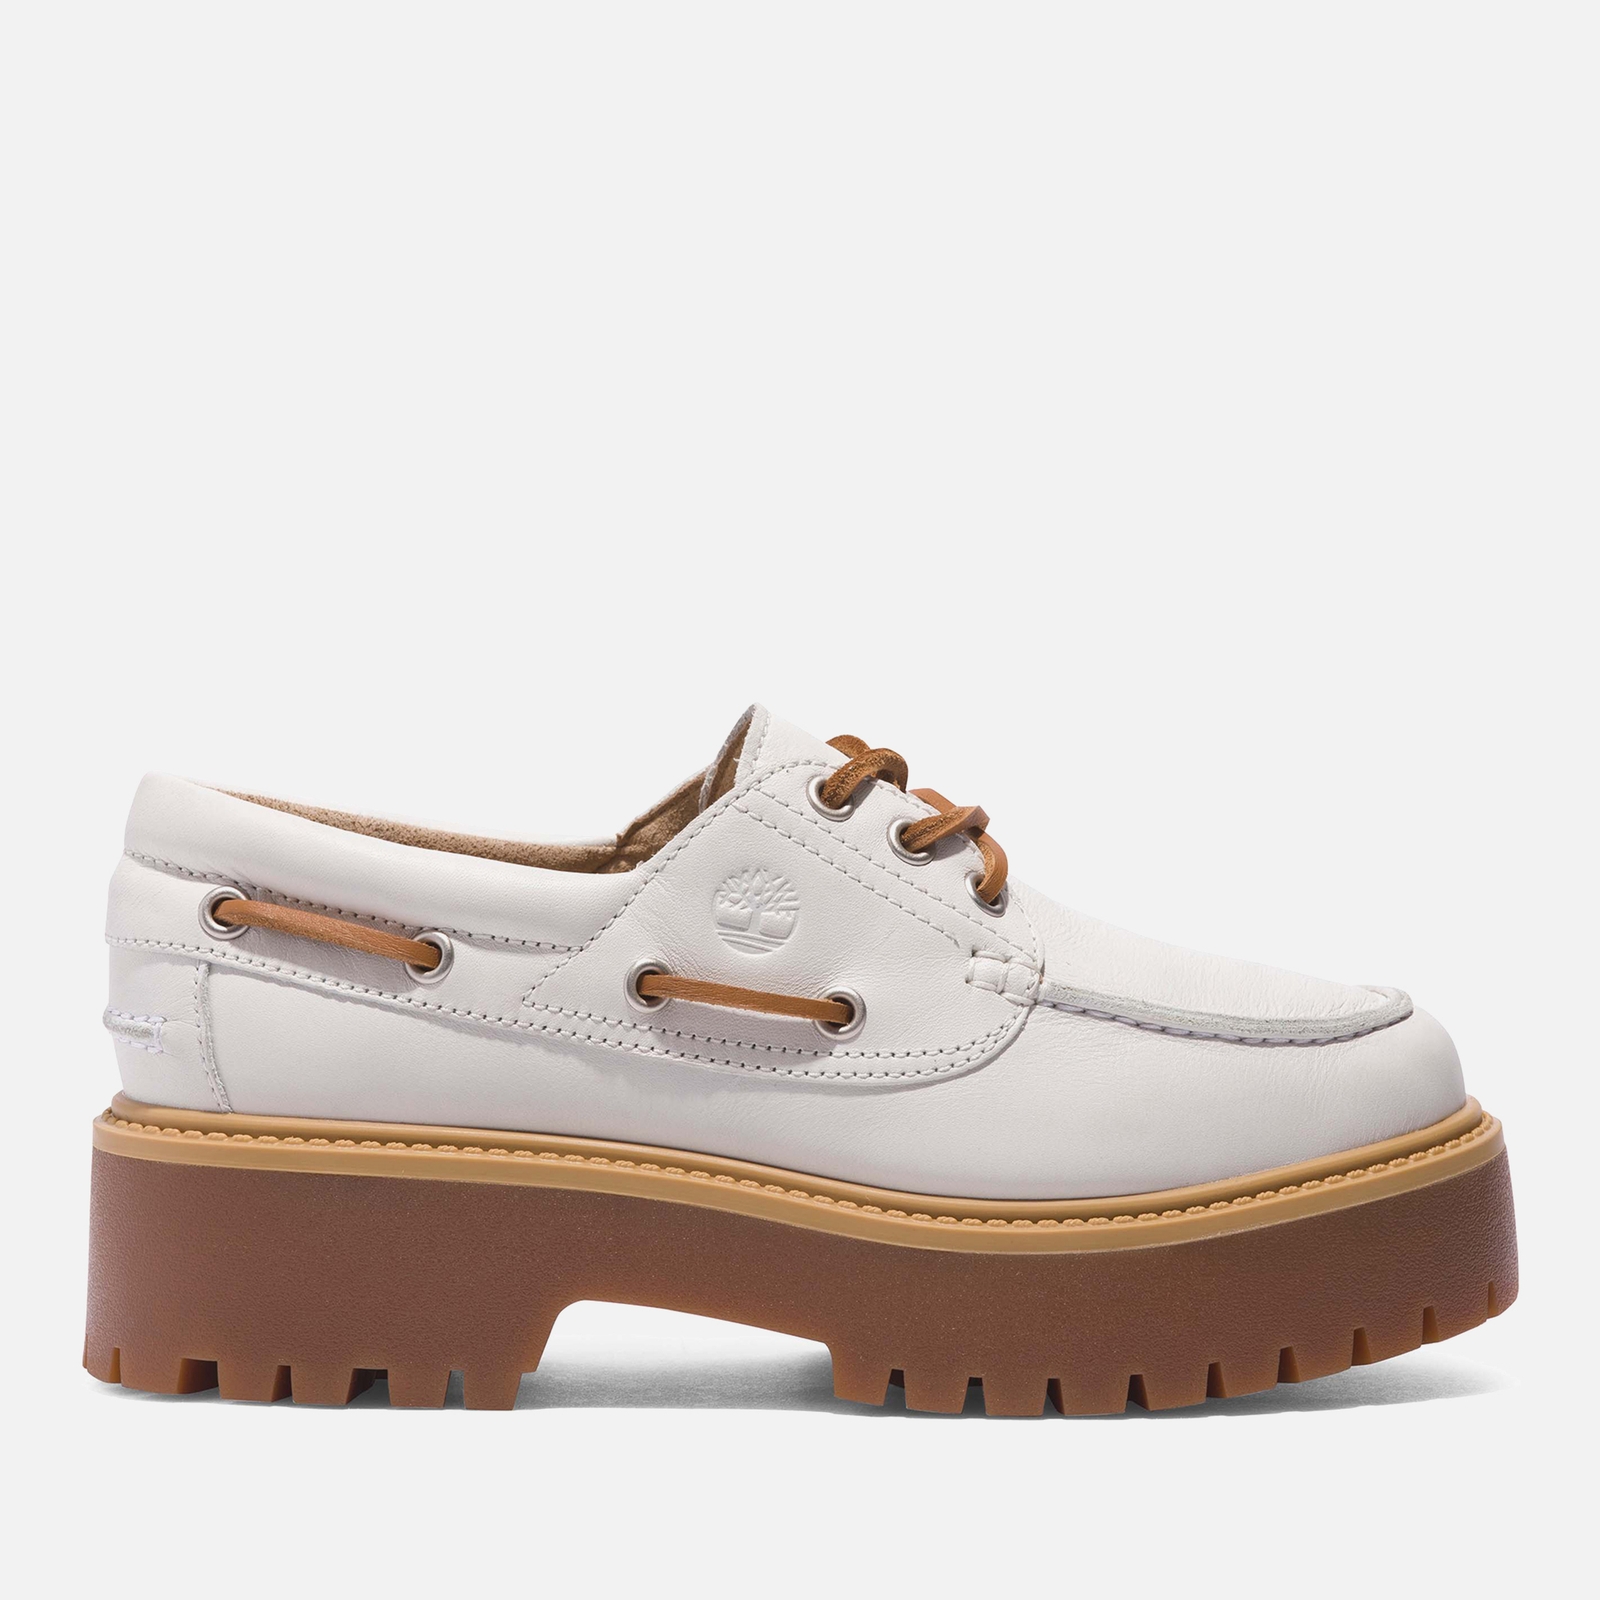 Timberland Women’s Slone Street Leather Boat Shoes